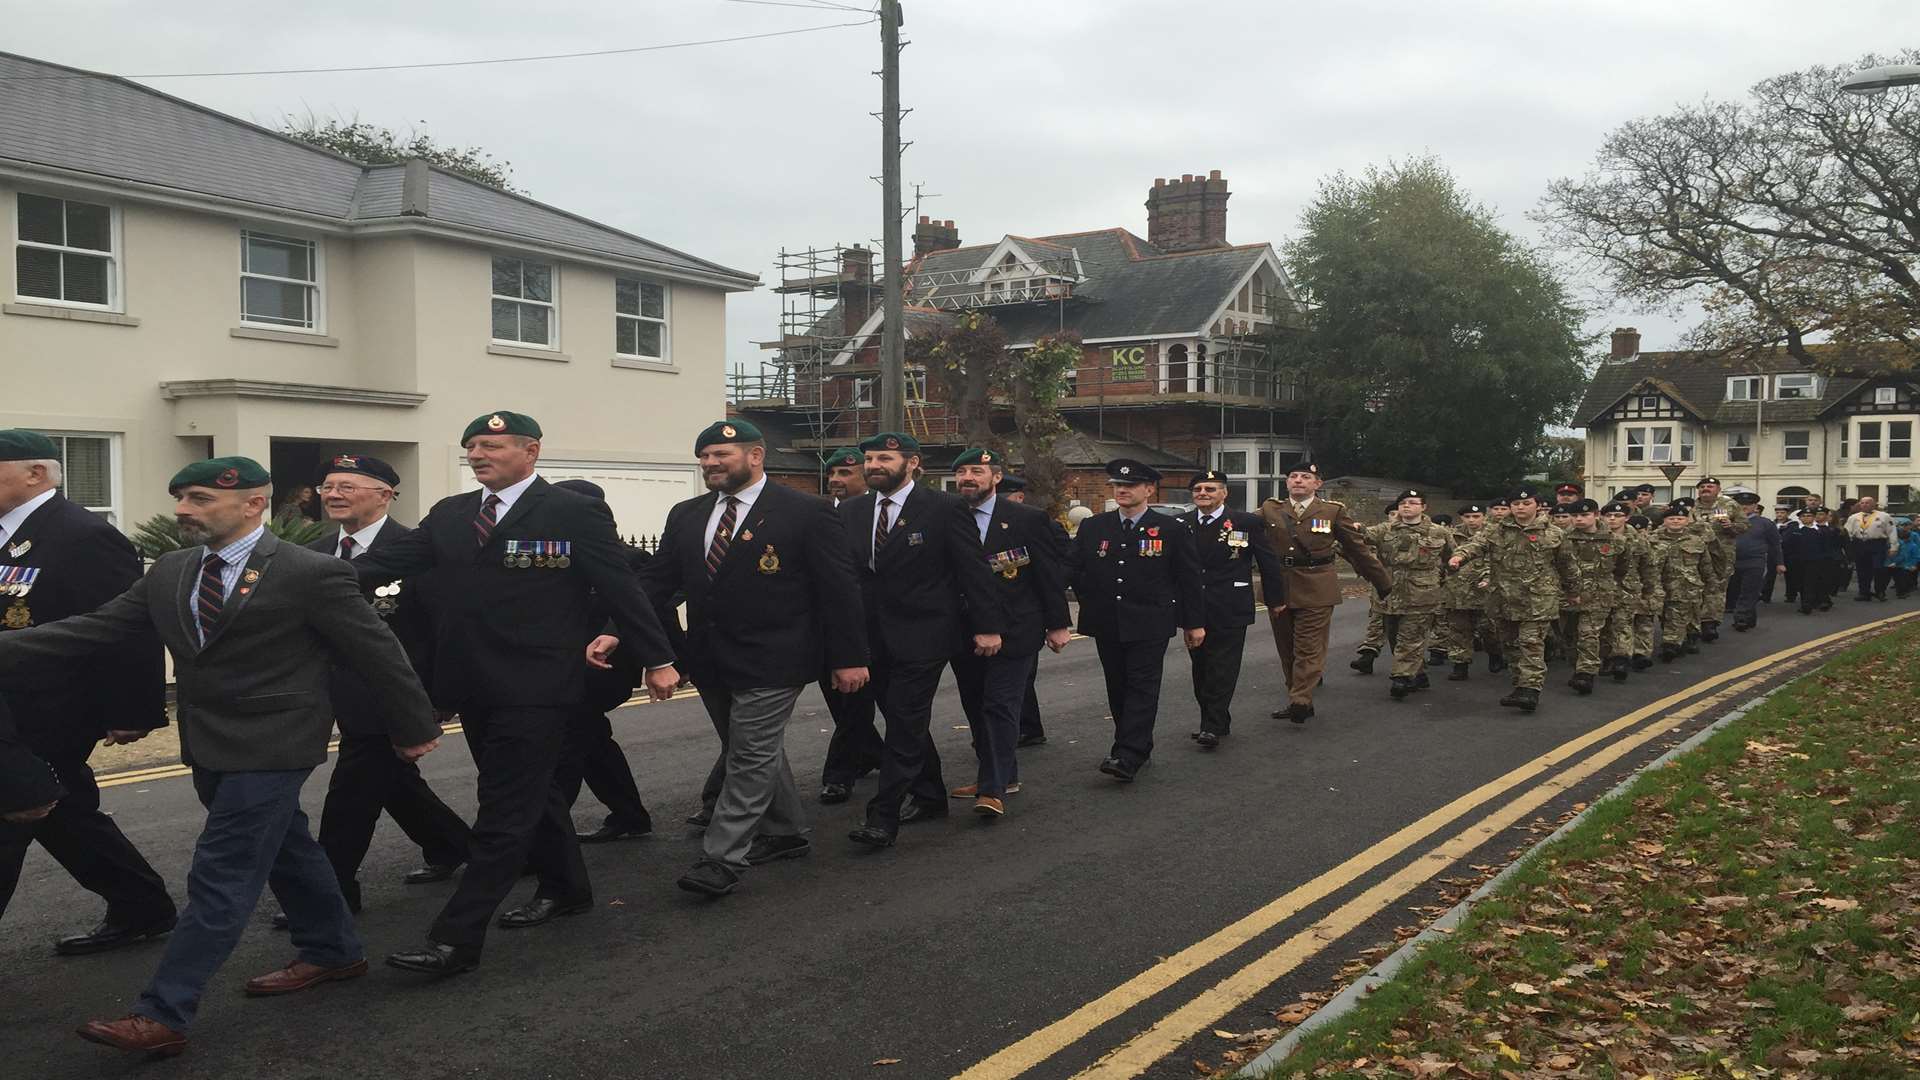 Several groups took part in the march in Deal